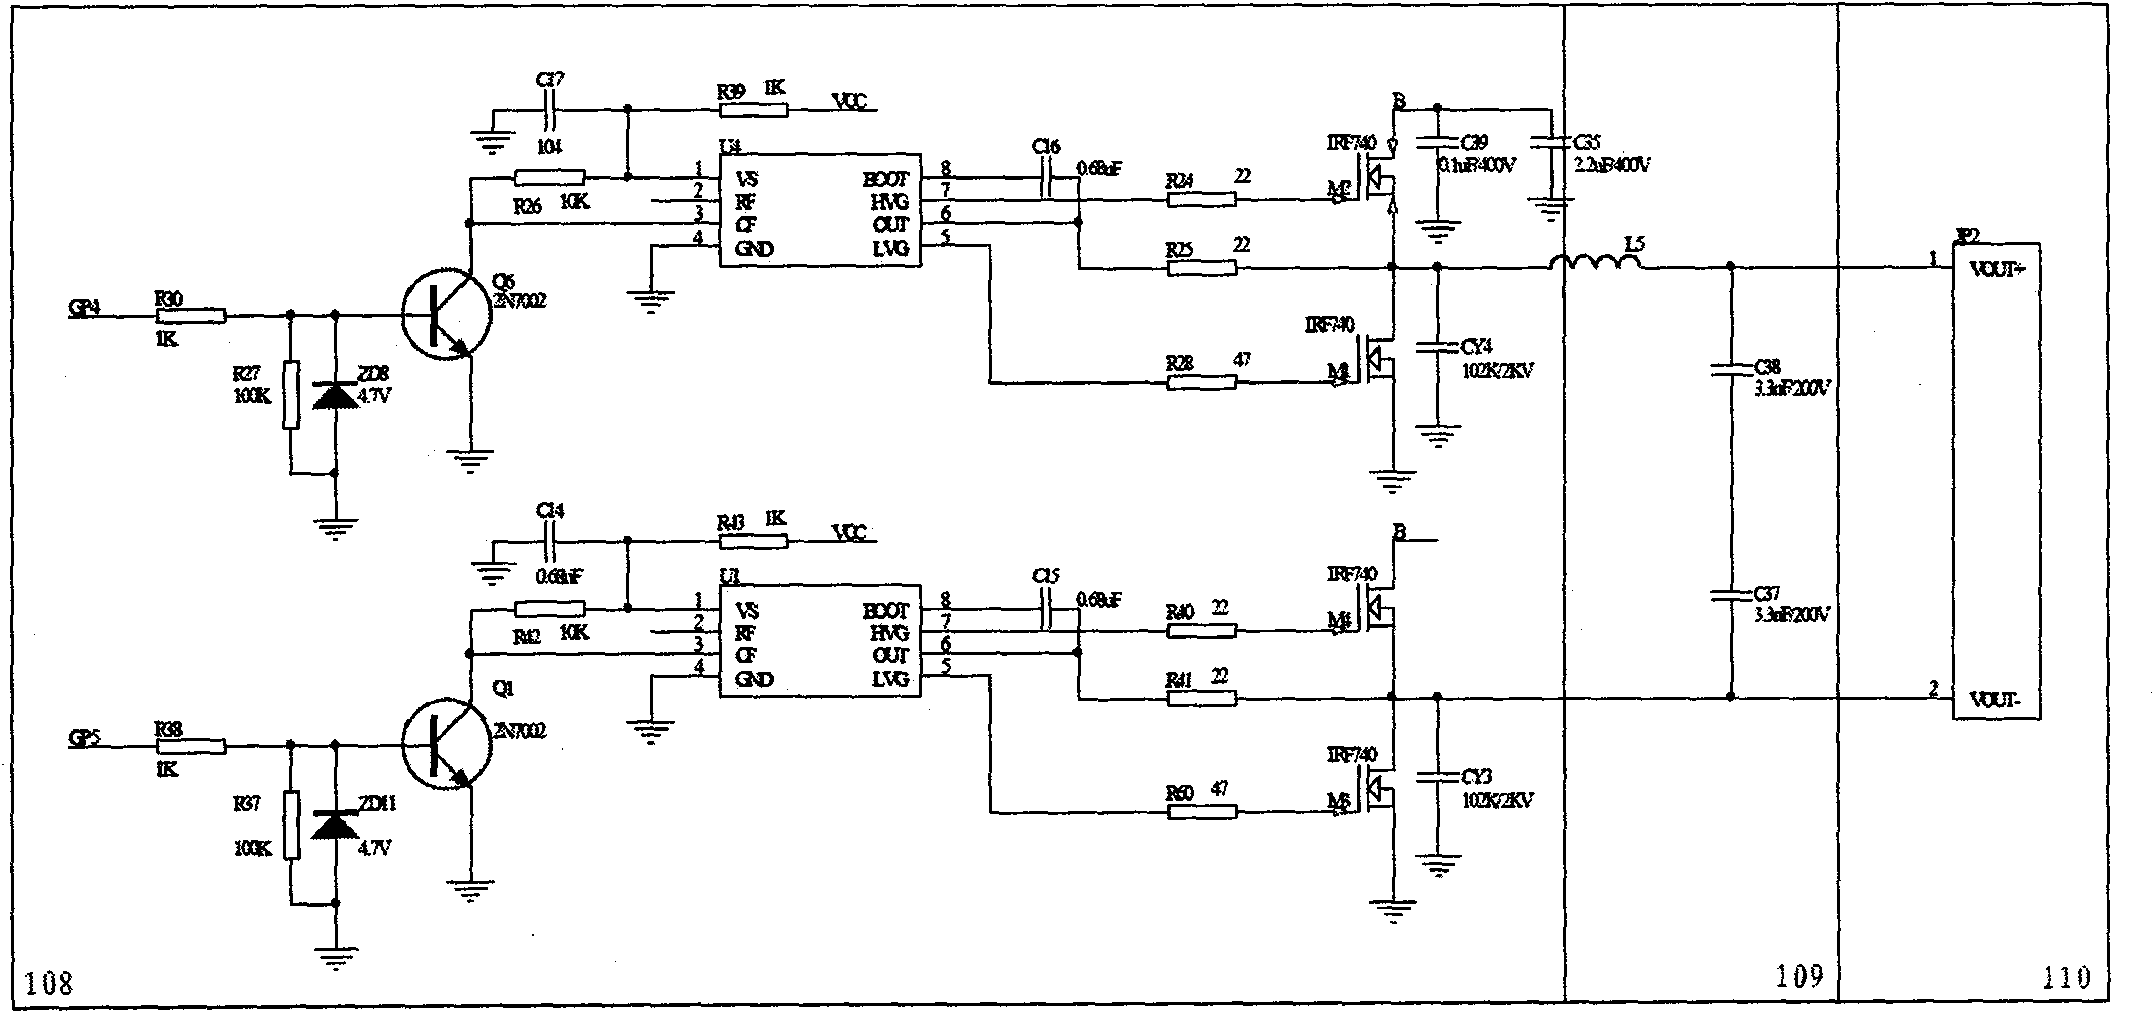 Electronic ballast for setting and adjusting output power in fixed time via dial-up